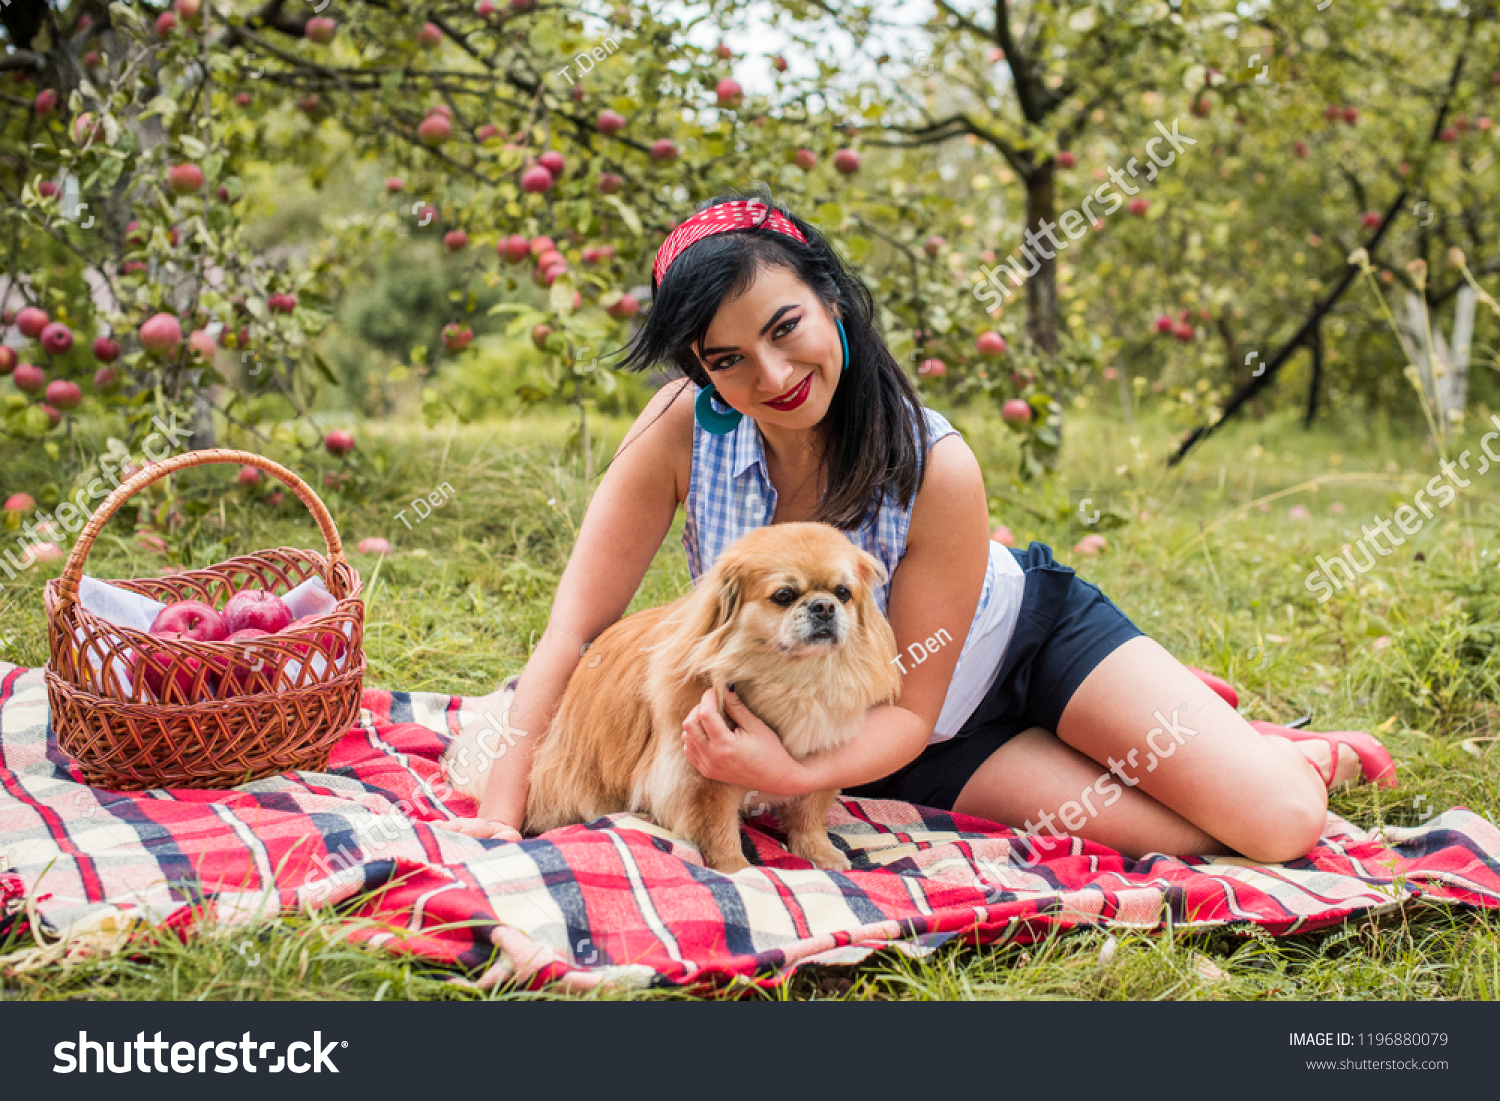 Young Woman Dog Picnic Little Dog Stock Photo (Edit Now) 1196880079